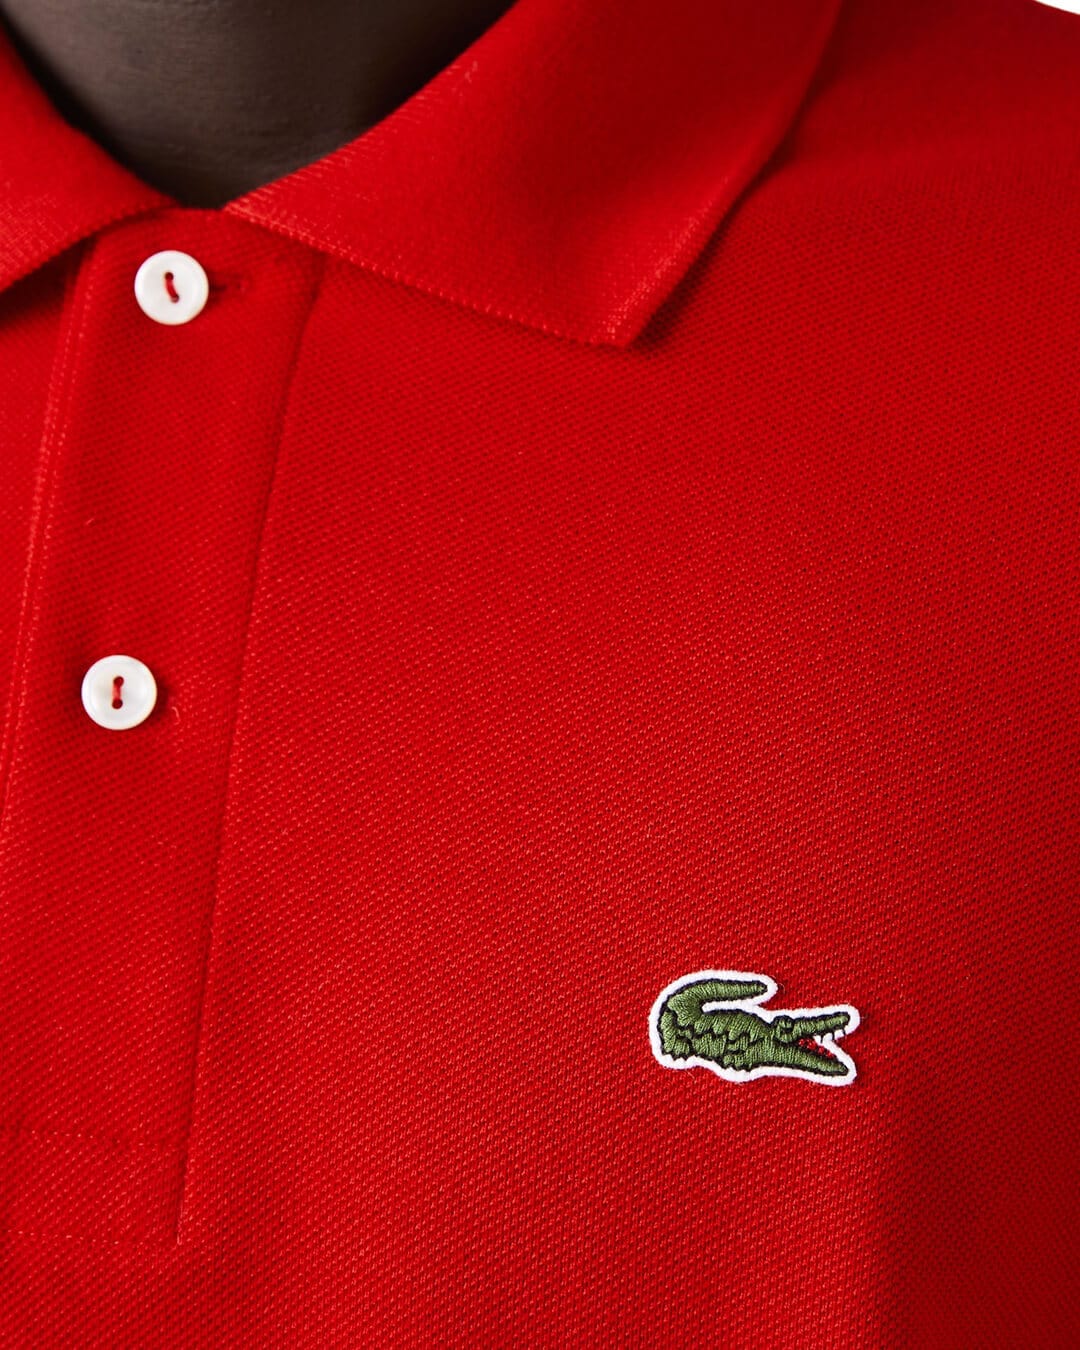 Lacoste Polo Shirts Lacoste Red Long Sleeves Polo Shirt